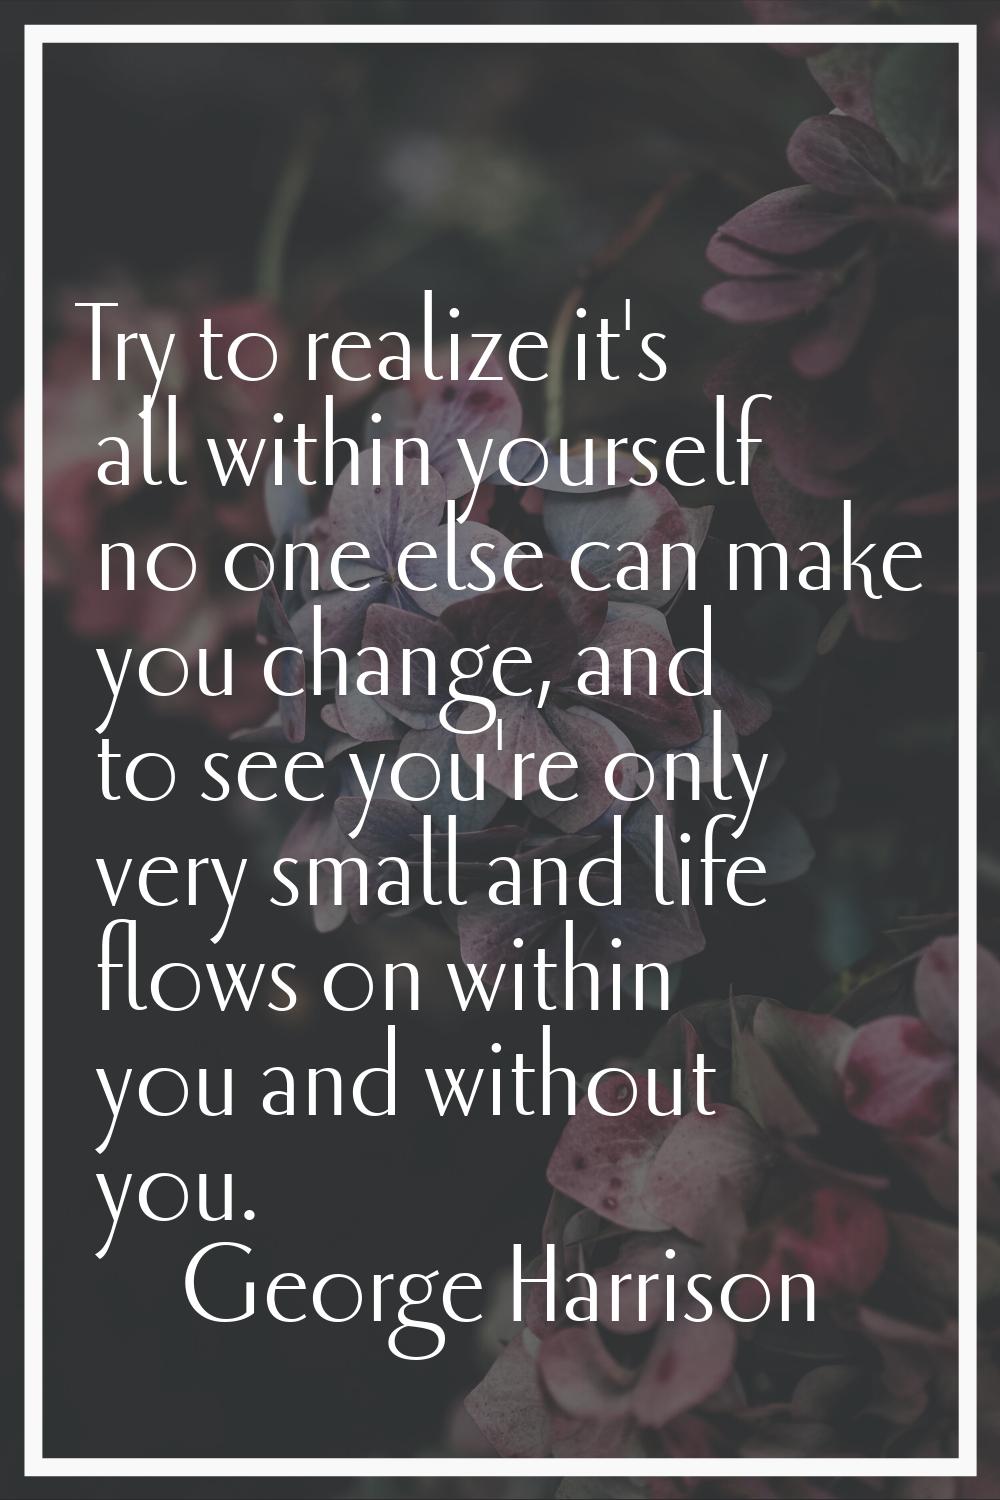 Try to realize it's all within yourself no one else can make you change, and to see you're only ver